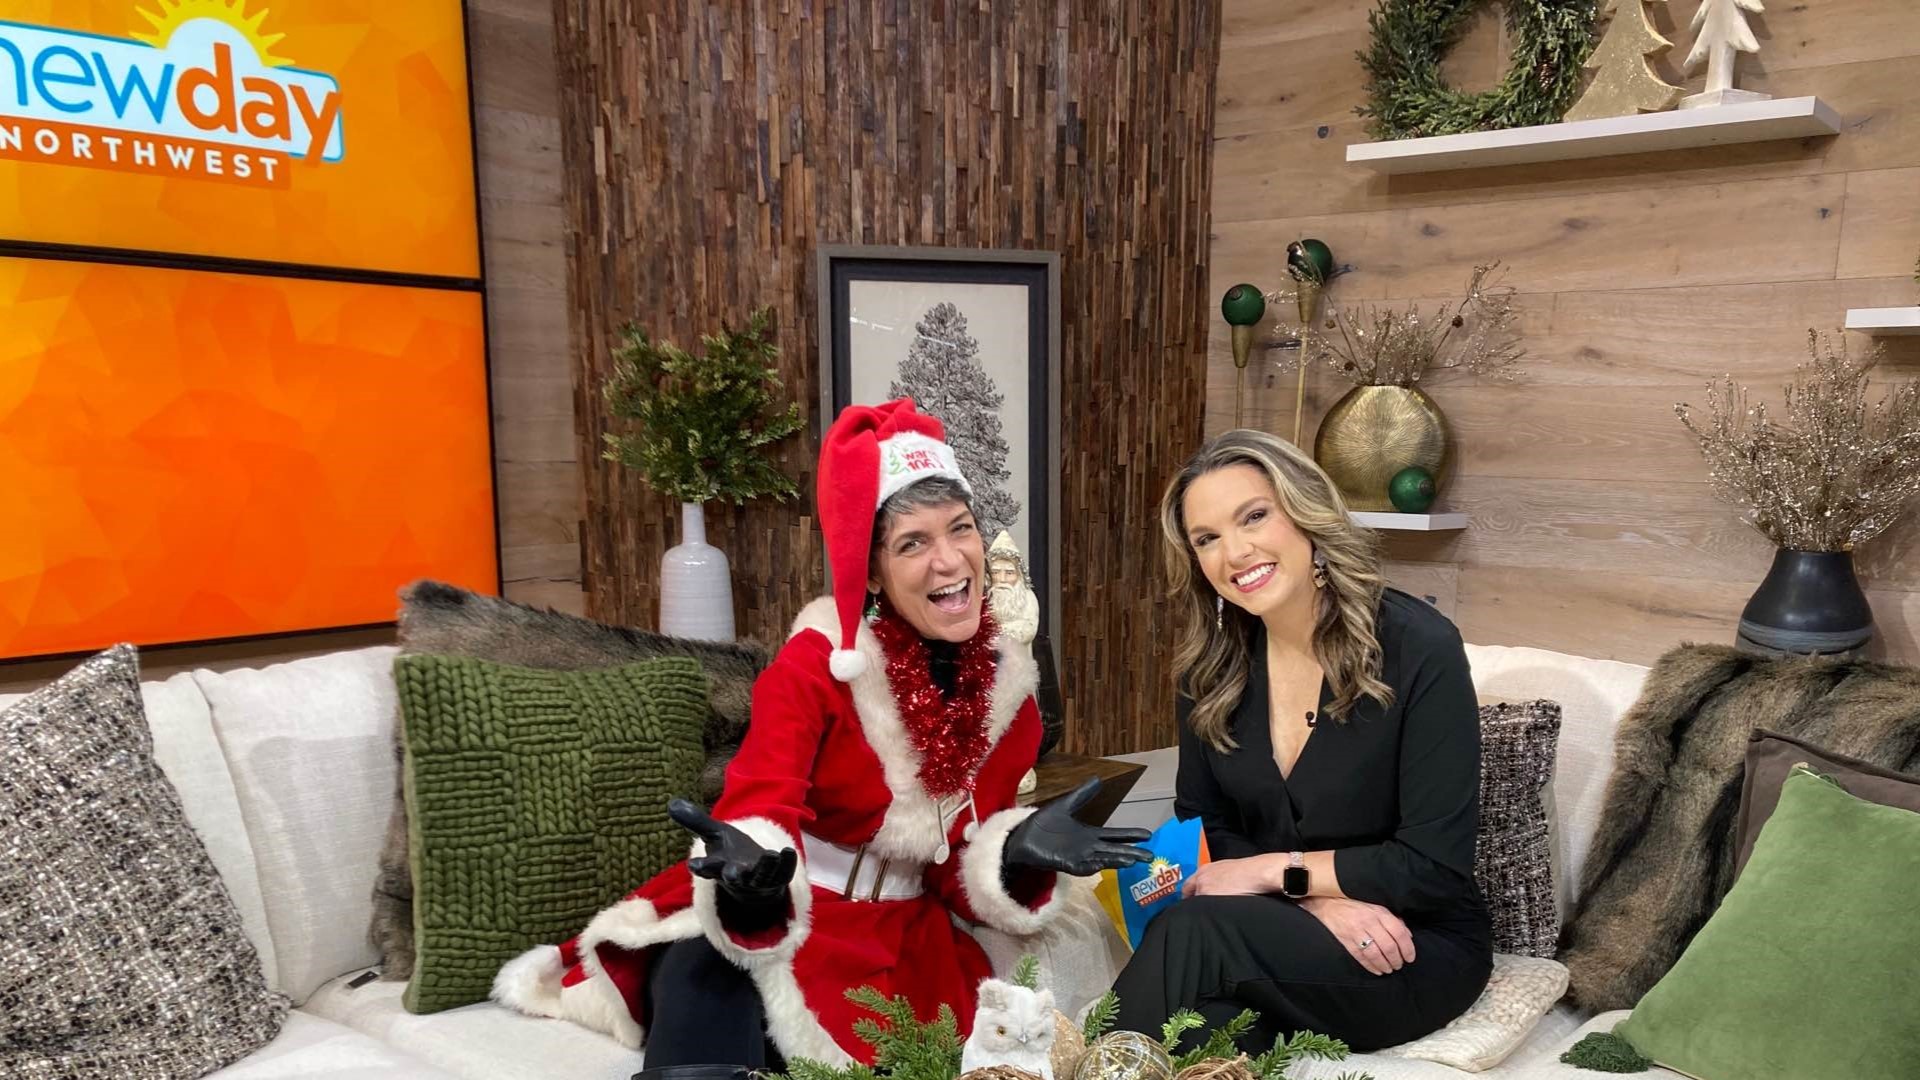 Shellie Hart from Warm 106.9 joined the show to chat about her favorite Christmas music. #newdaynw